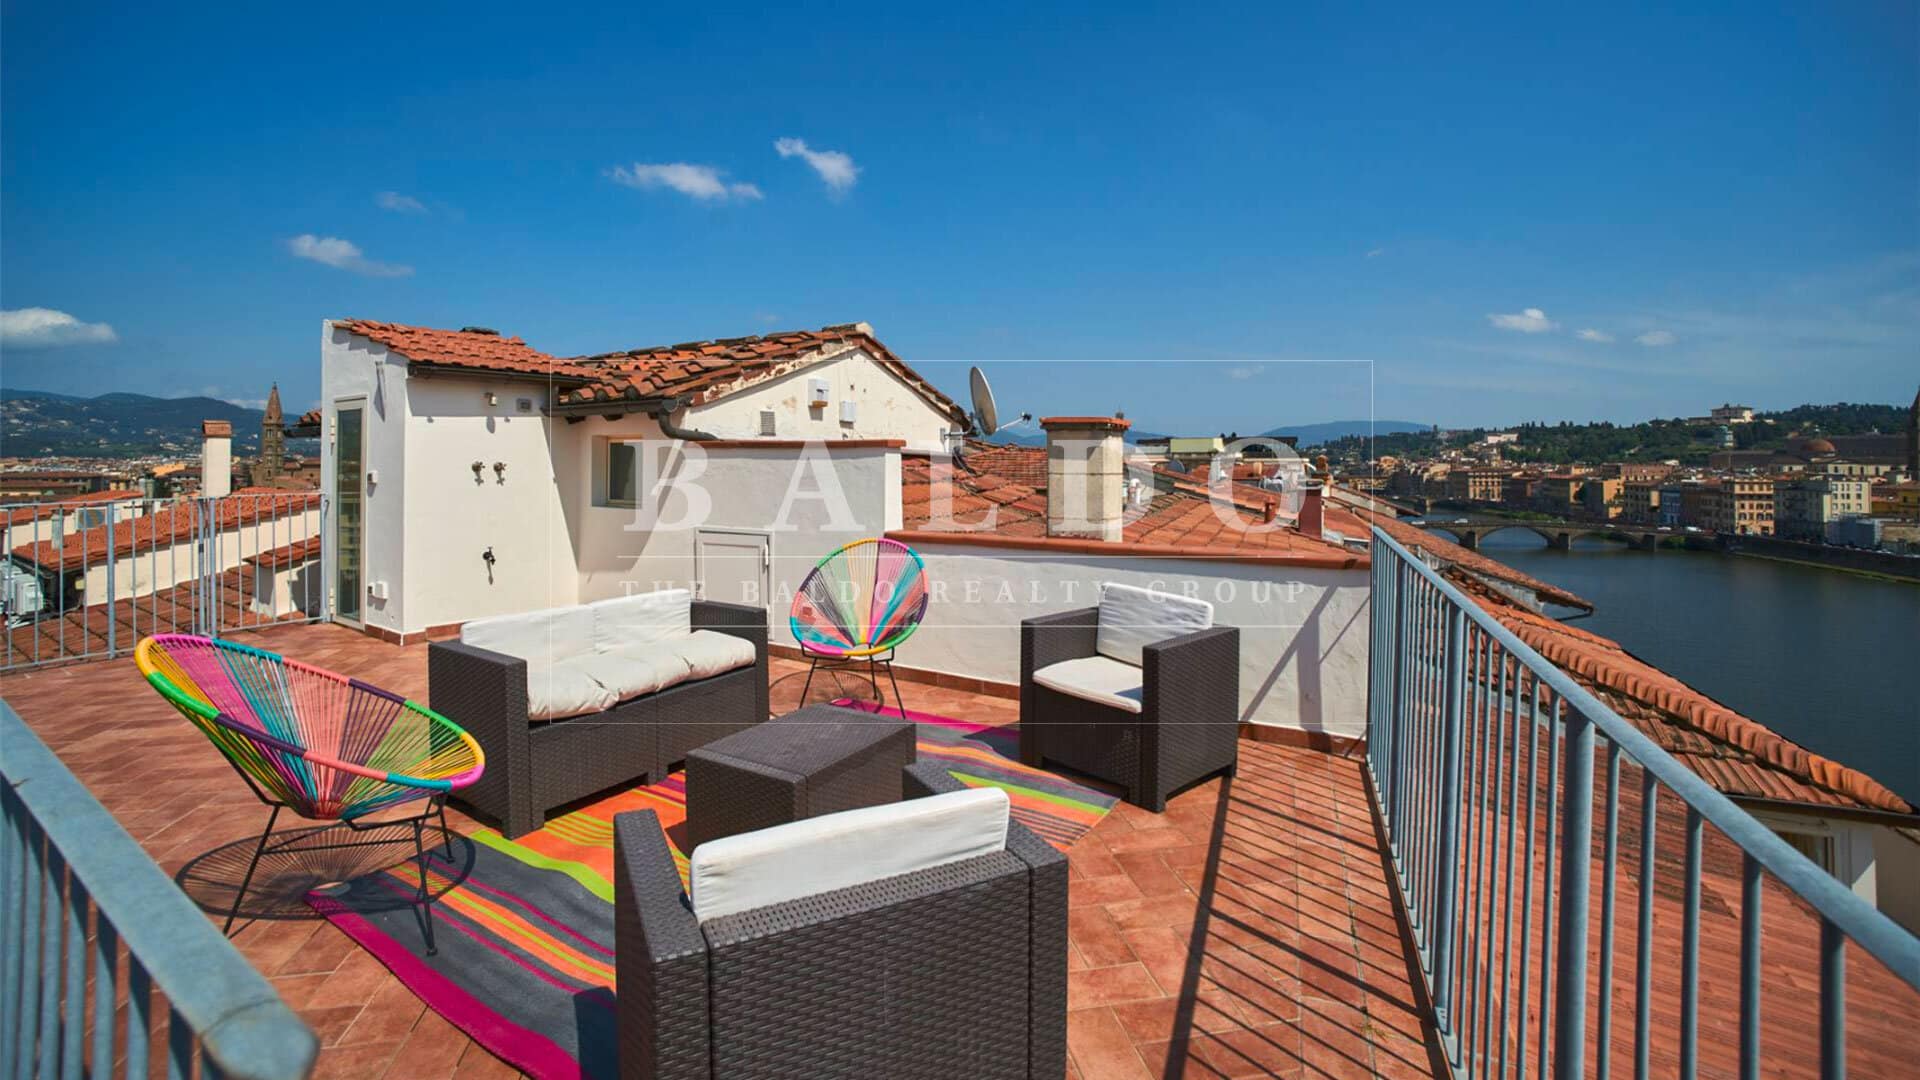 AMAZING 170 SQM PROPERTY WITH TERRACES IN FLORENCE | LUNGARNO VESPUCCI - Photo 1